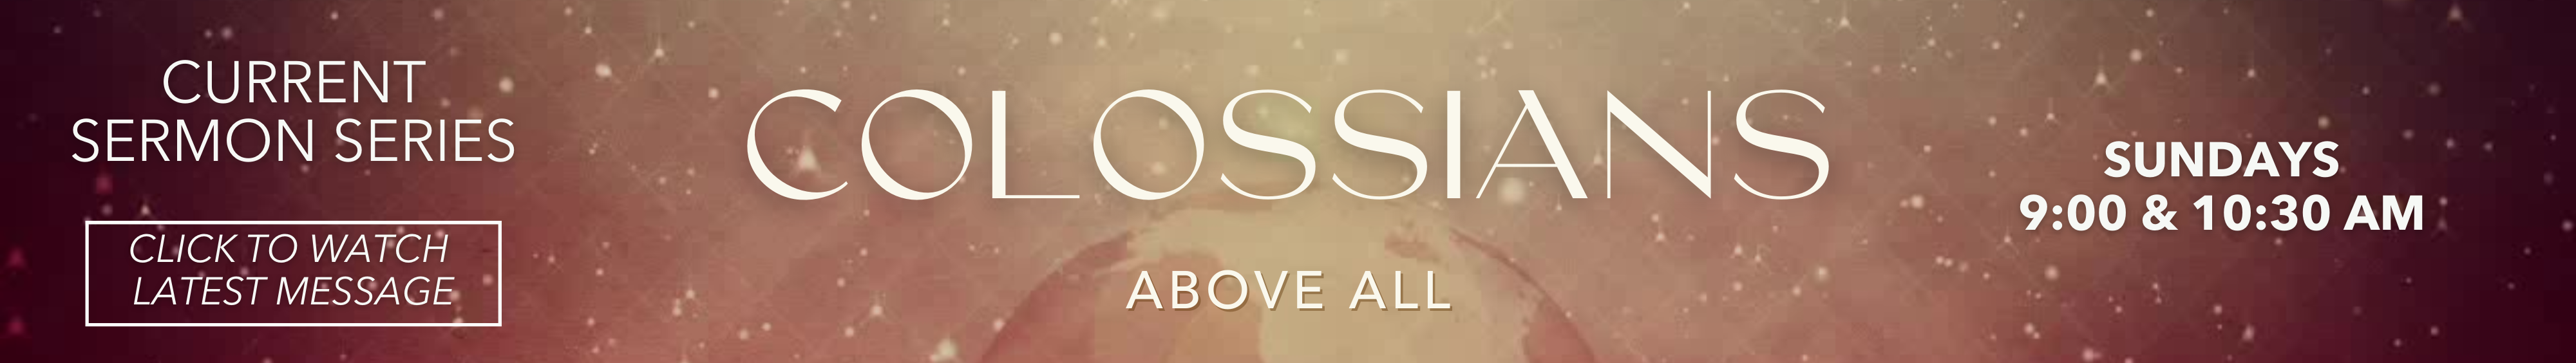 current_sermon_series_colossians.png